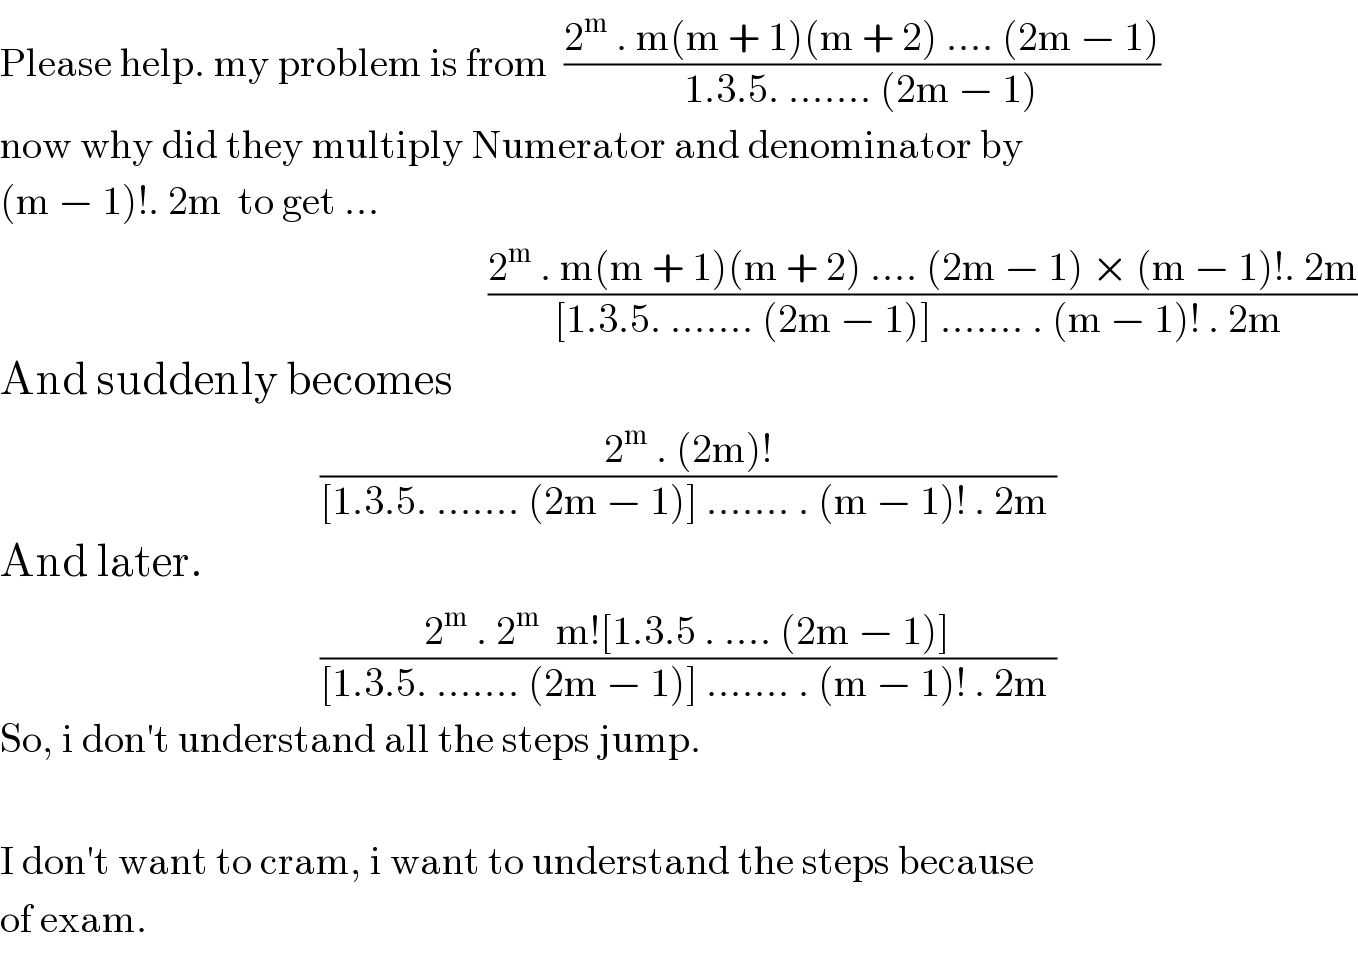 Please help. my problem is from  ((2^m  . m(m + 1)(m + 2) .... (2m − 1))/(1.3.5. ....... (2m − 1)))  now why did they multiply Numerator and denominator by  (m − 1)!. 2m  to get ...                                                               ((2^m  . m(m + 1)(m + 2) .... (2m − 1) × (m − 1)!. 2m)/([1.3.5. ....... (2m − 1)] ....... . (m − 1)! . 2m ))  And suddenly becomes                                          ((2^m  . (2m)!)/([1.3.5. ....... (2m − 1)] ....... . (m − 1)! . 2m ))  And later.                                           ((2^m  . 2^m   m![1.3.5 . .... (2m − 1)])/([1.3.5. ....... (2m − 1)] ....... . (m − 1)! . 2m ))  So, i don′t understand all the steps jump.    I don′t want to cram, i want to understand the steps because  of exam.   